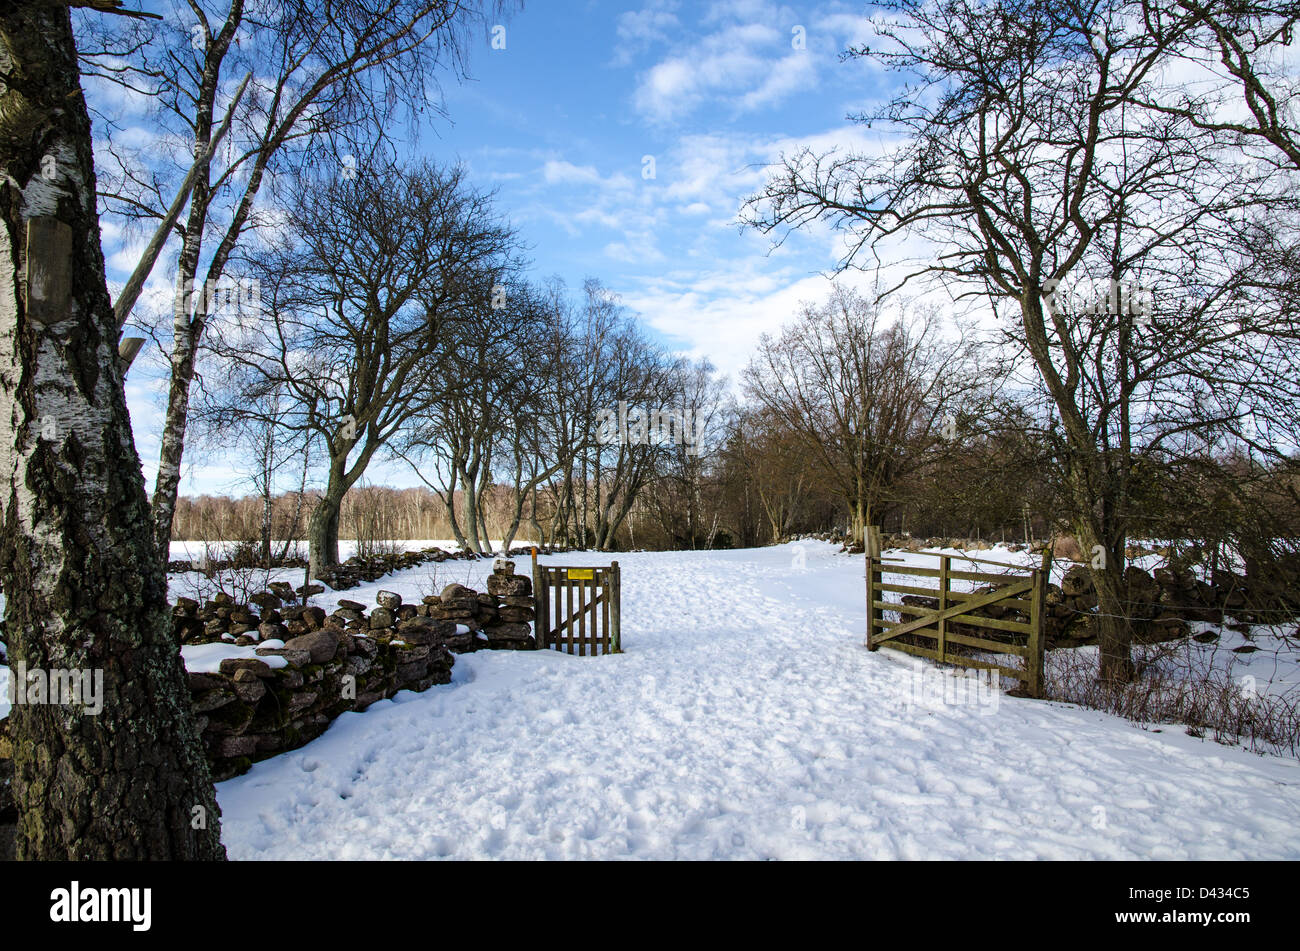 Open gate in a rural winter landscape with snow, stonewalls and trees, Stock Photo